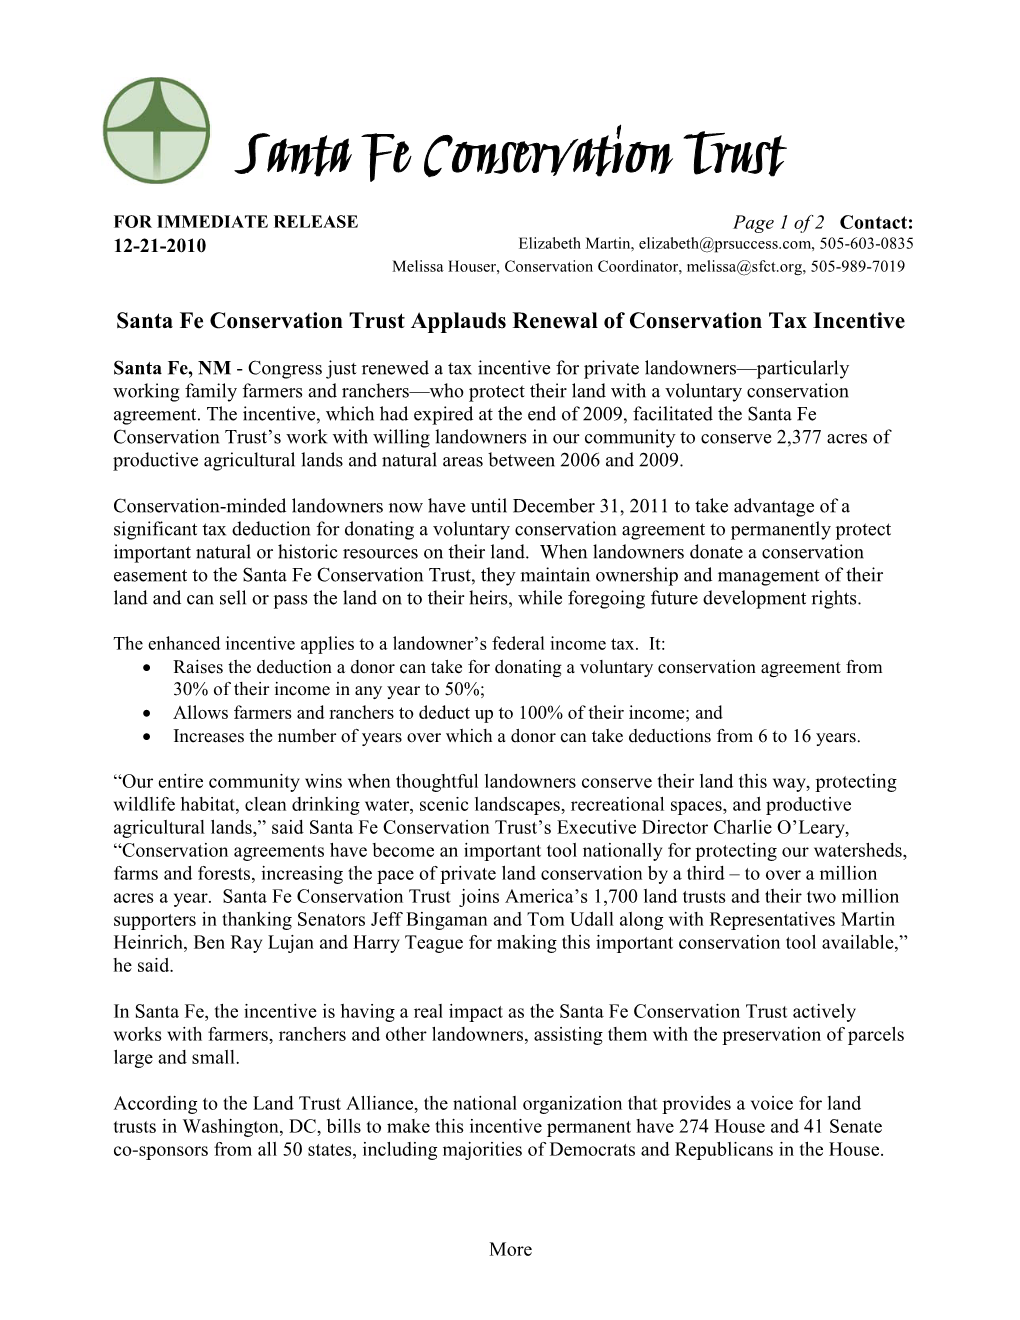 Santa Fe Conservation Trust Applauds Renewal of Conservation Tax Incentive